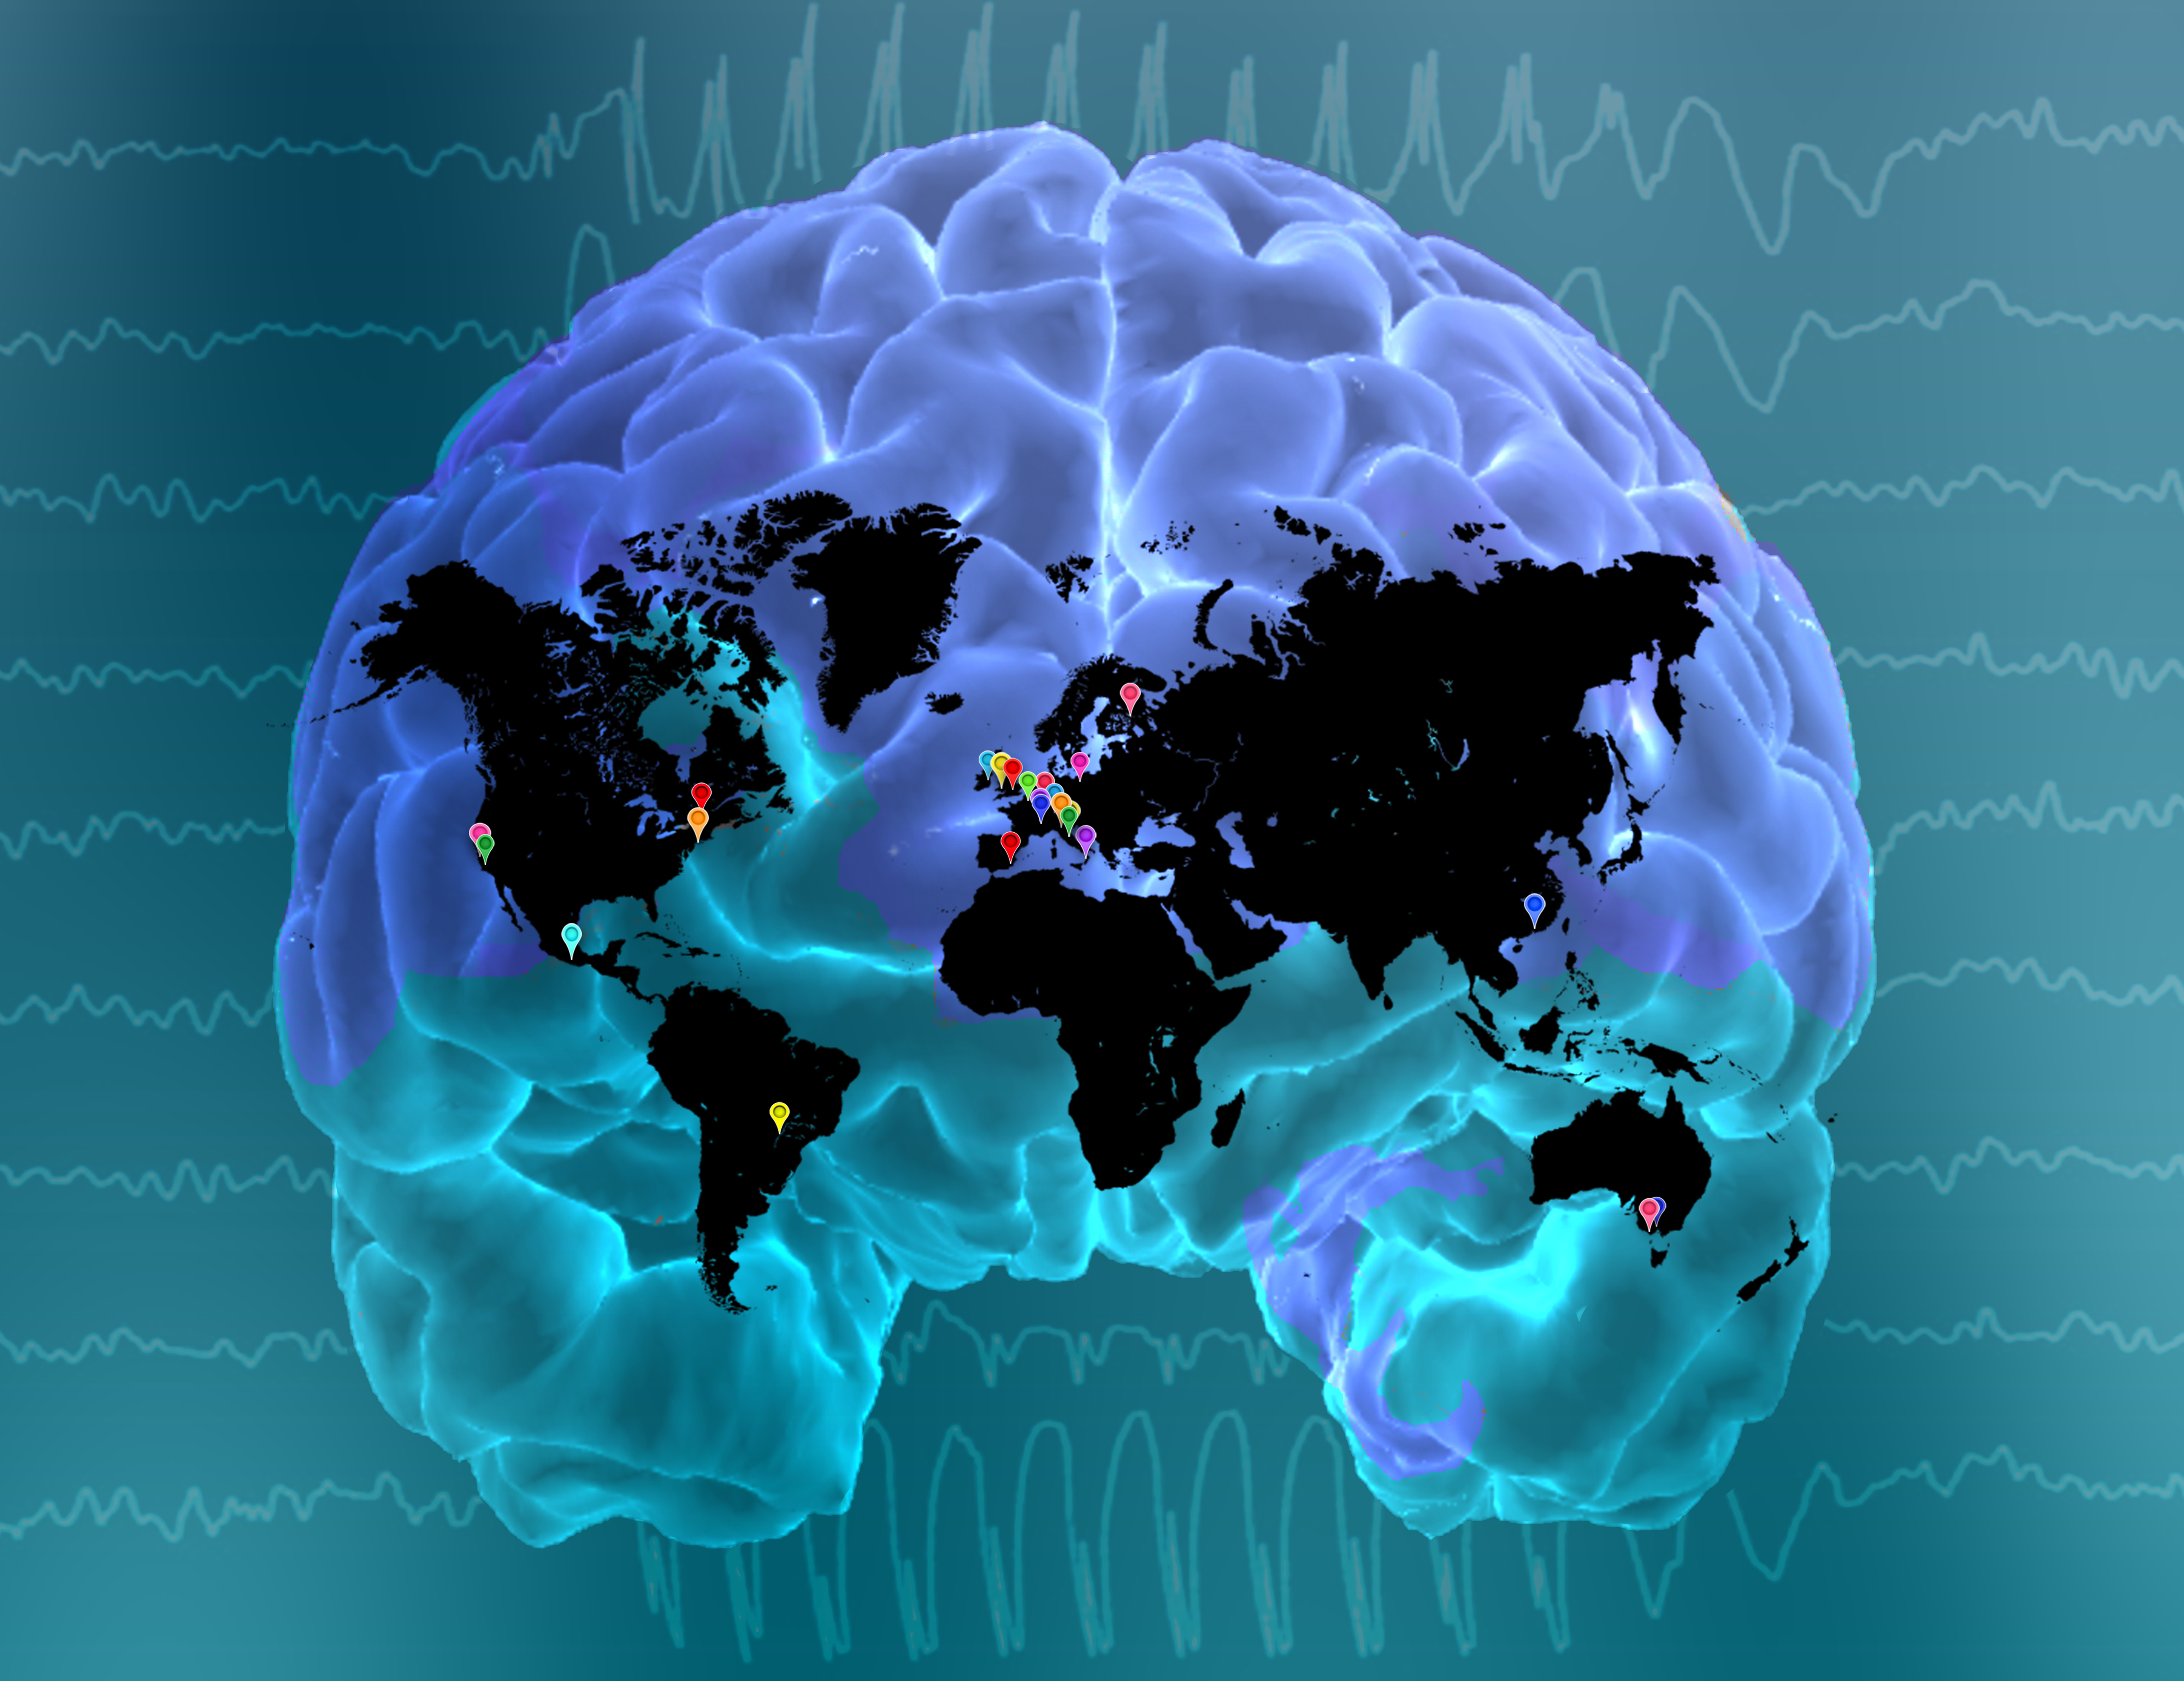 Epilepsy linked to subtle changes in brain volume and thickness.